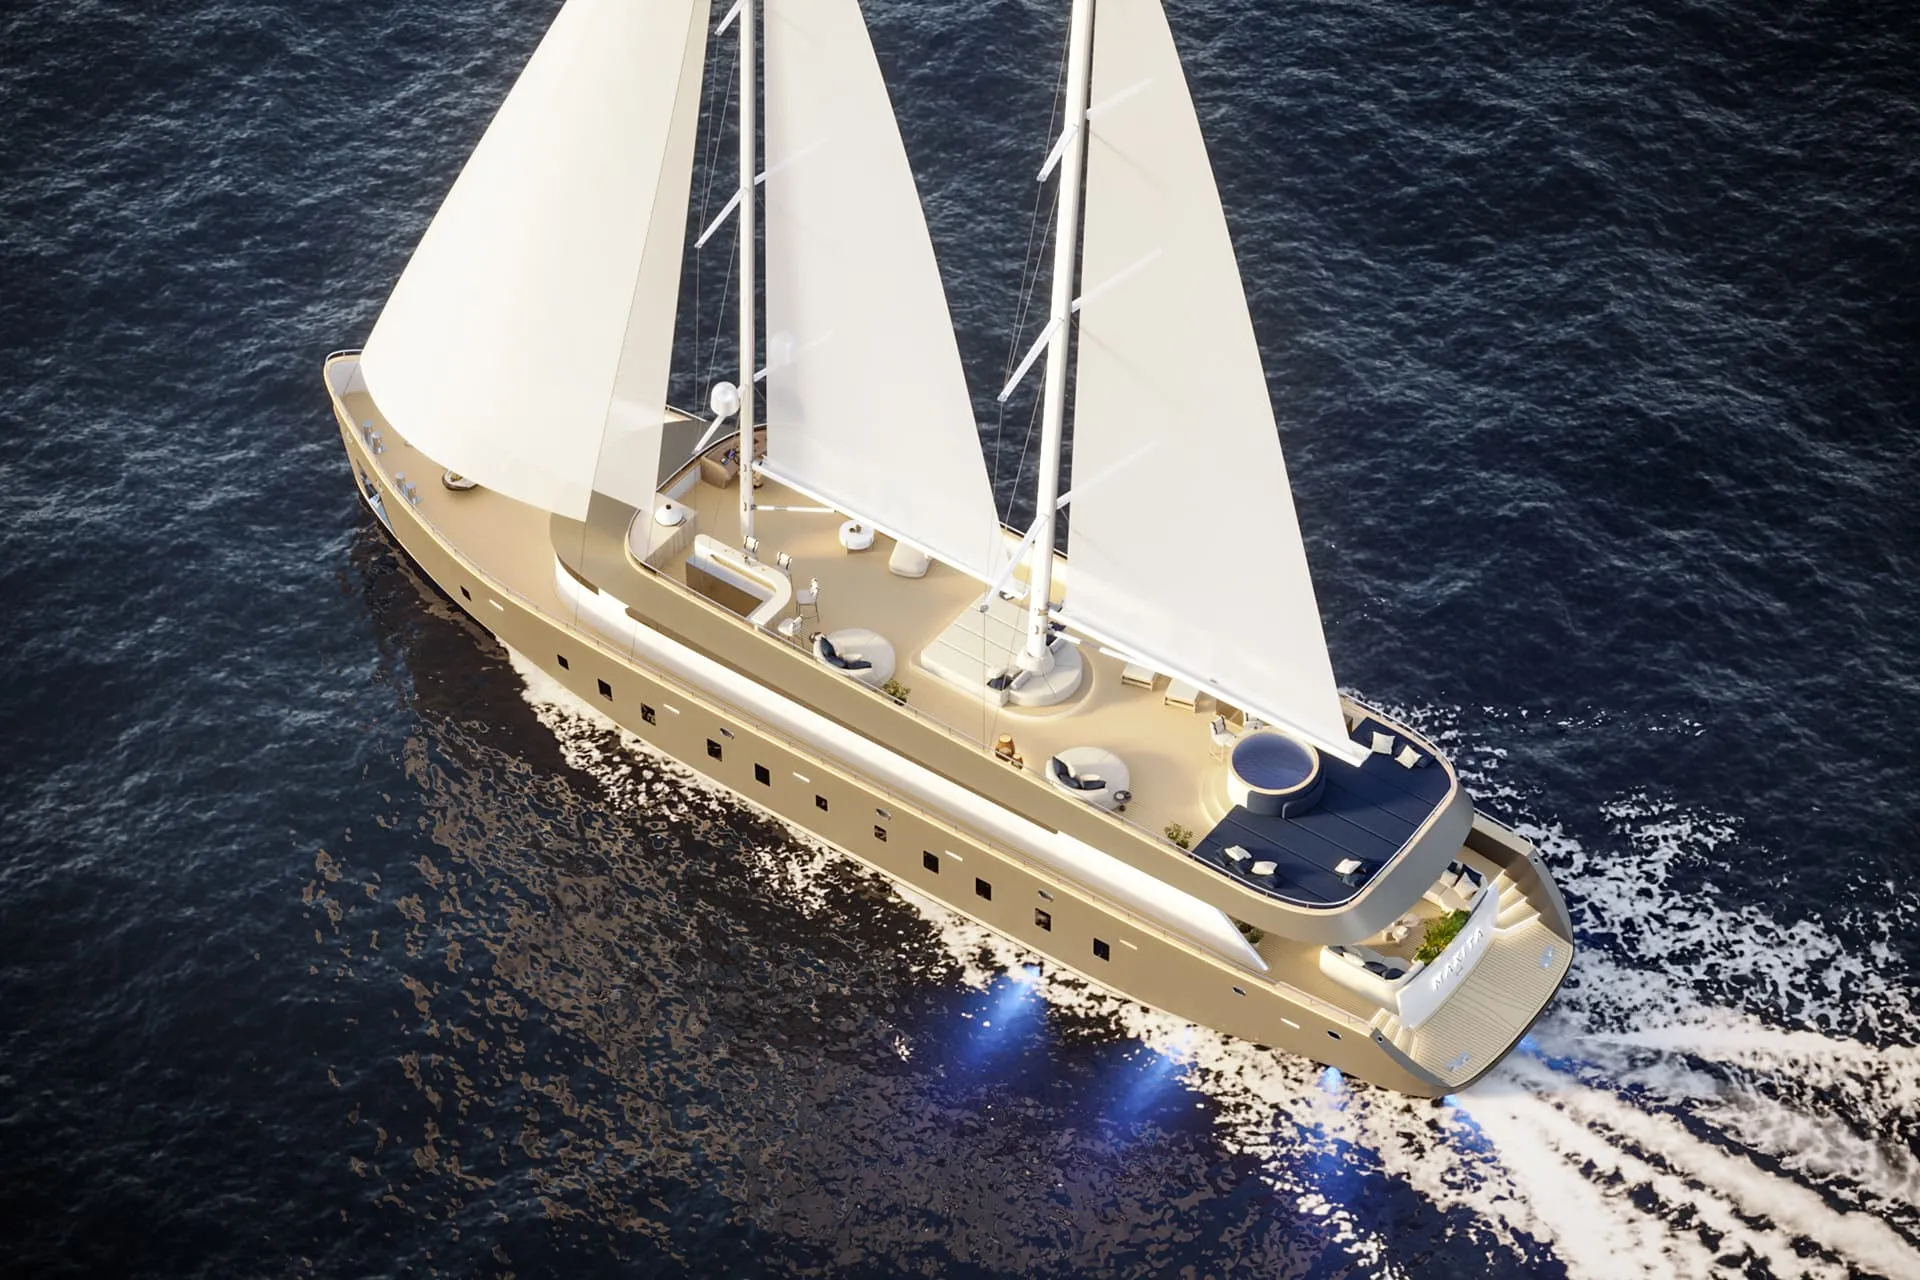 An extraordinary yacht charter in the Adriatic Sea aboard a brand-new luxury DS Yacht Maxita